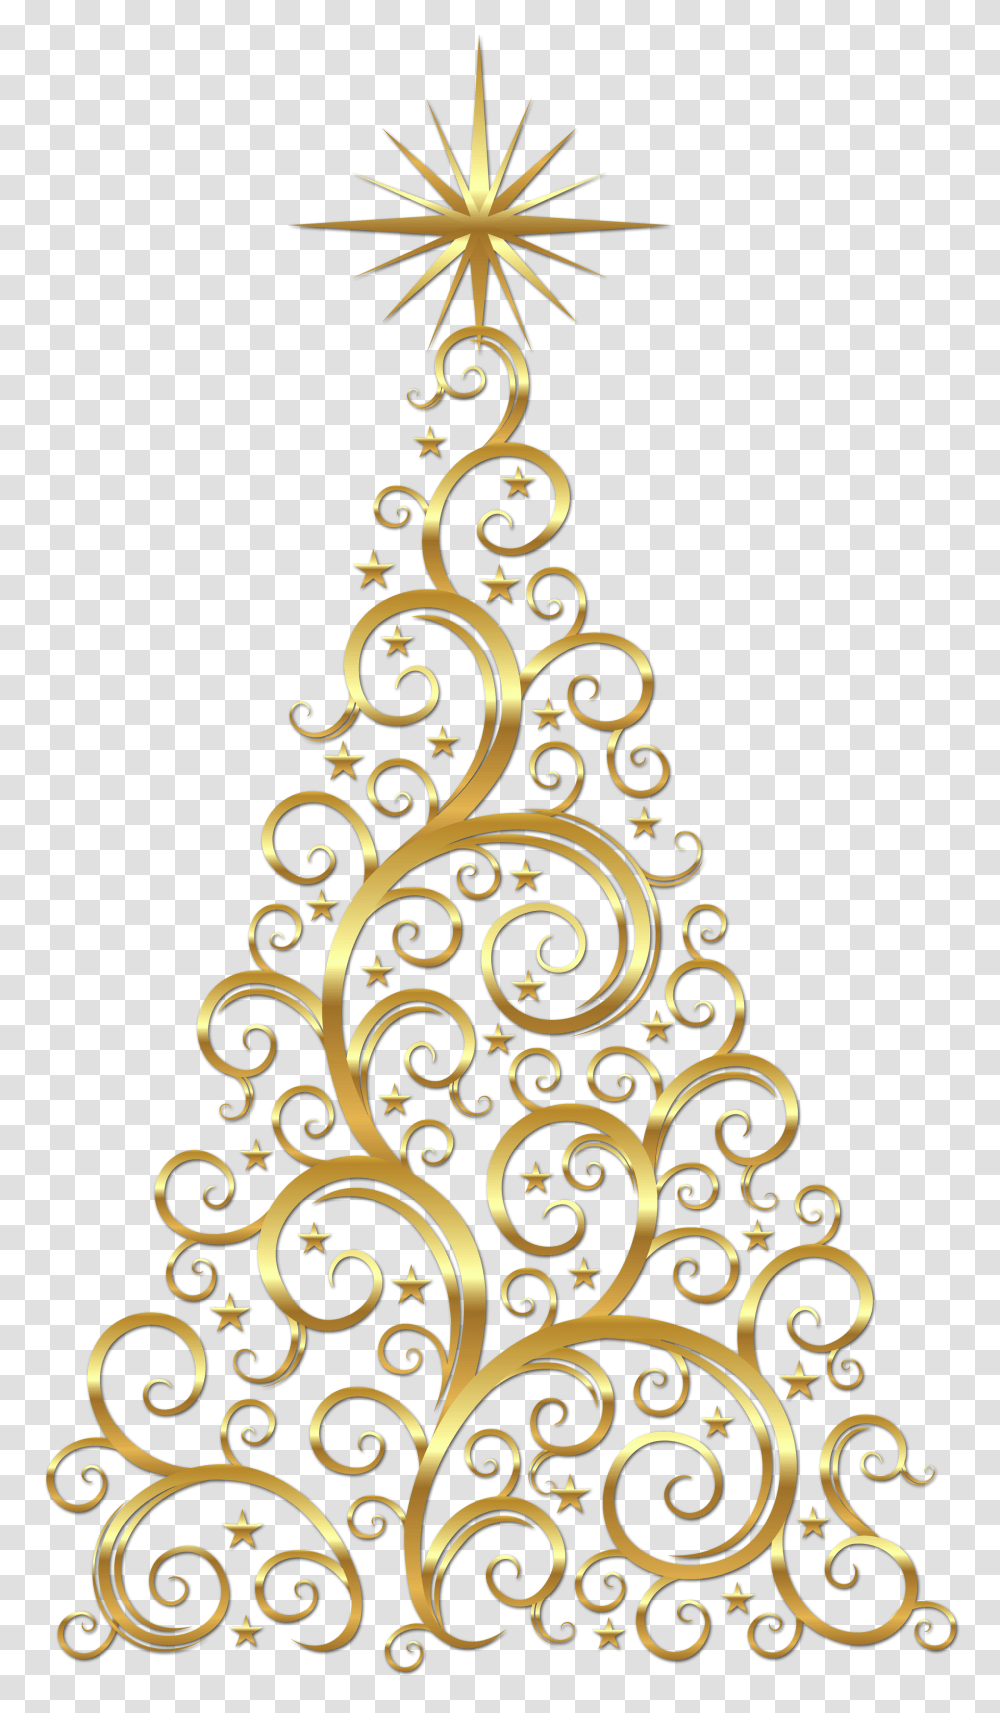 Gold Deco Christmas Tree Clipart Gold Christmas Tree Clipart, Plant, Ornament, Graphics, Floral Design Transparent Png